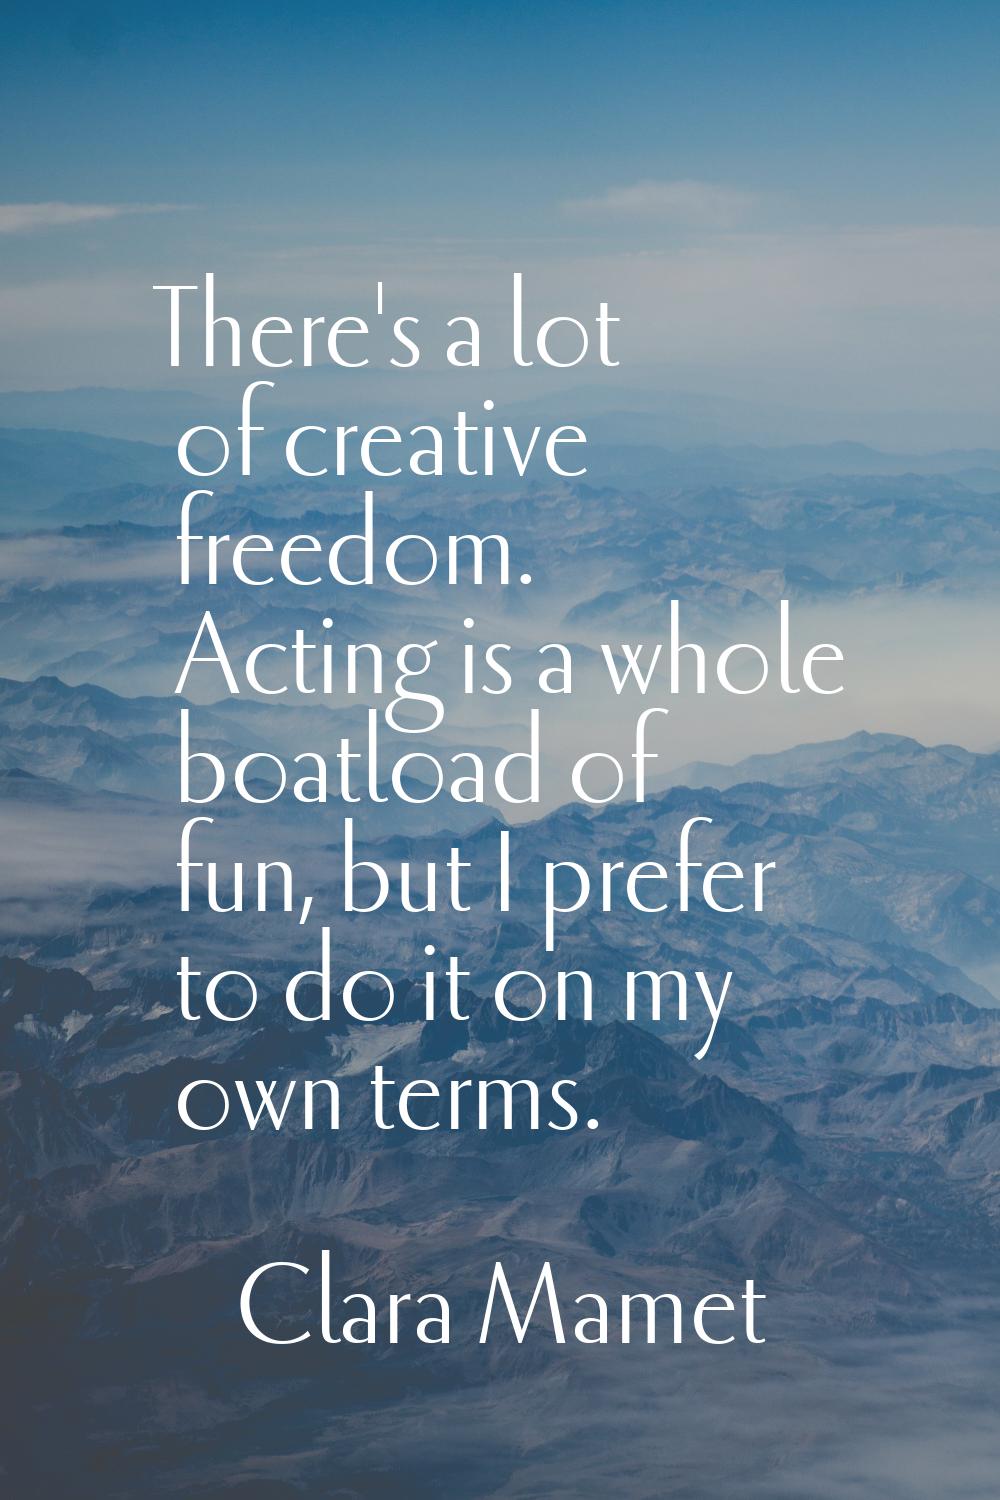 There's a lot of creative freedom. Acting is a whole boatload of fun, but I prefer to do it on my o